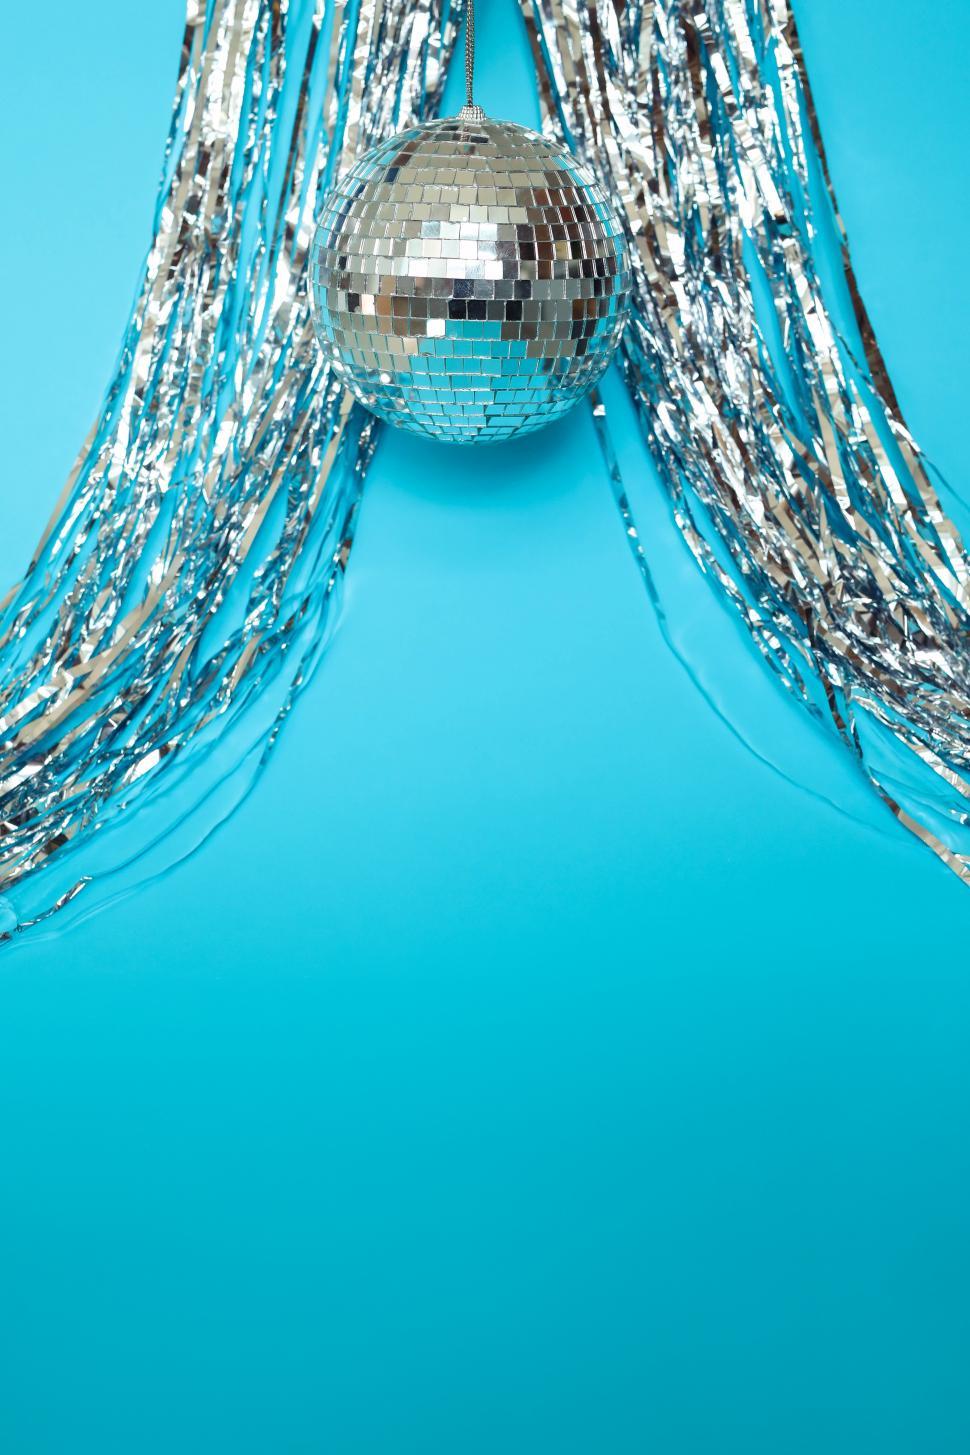 Free Image of Mirrored party ball and decoration 